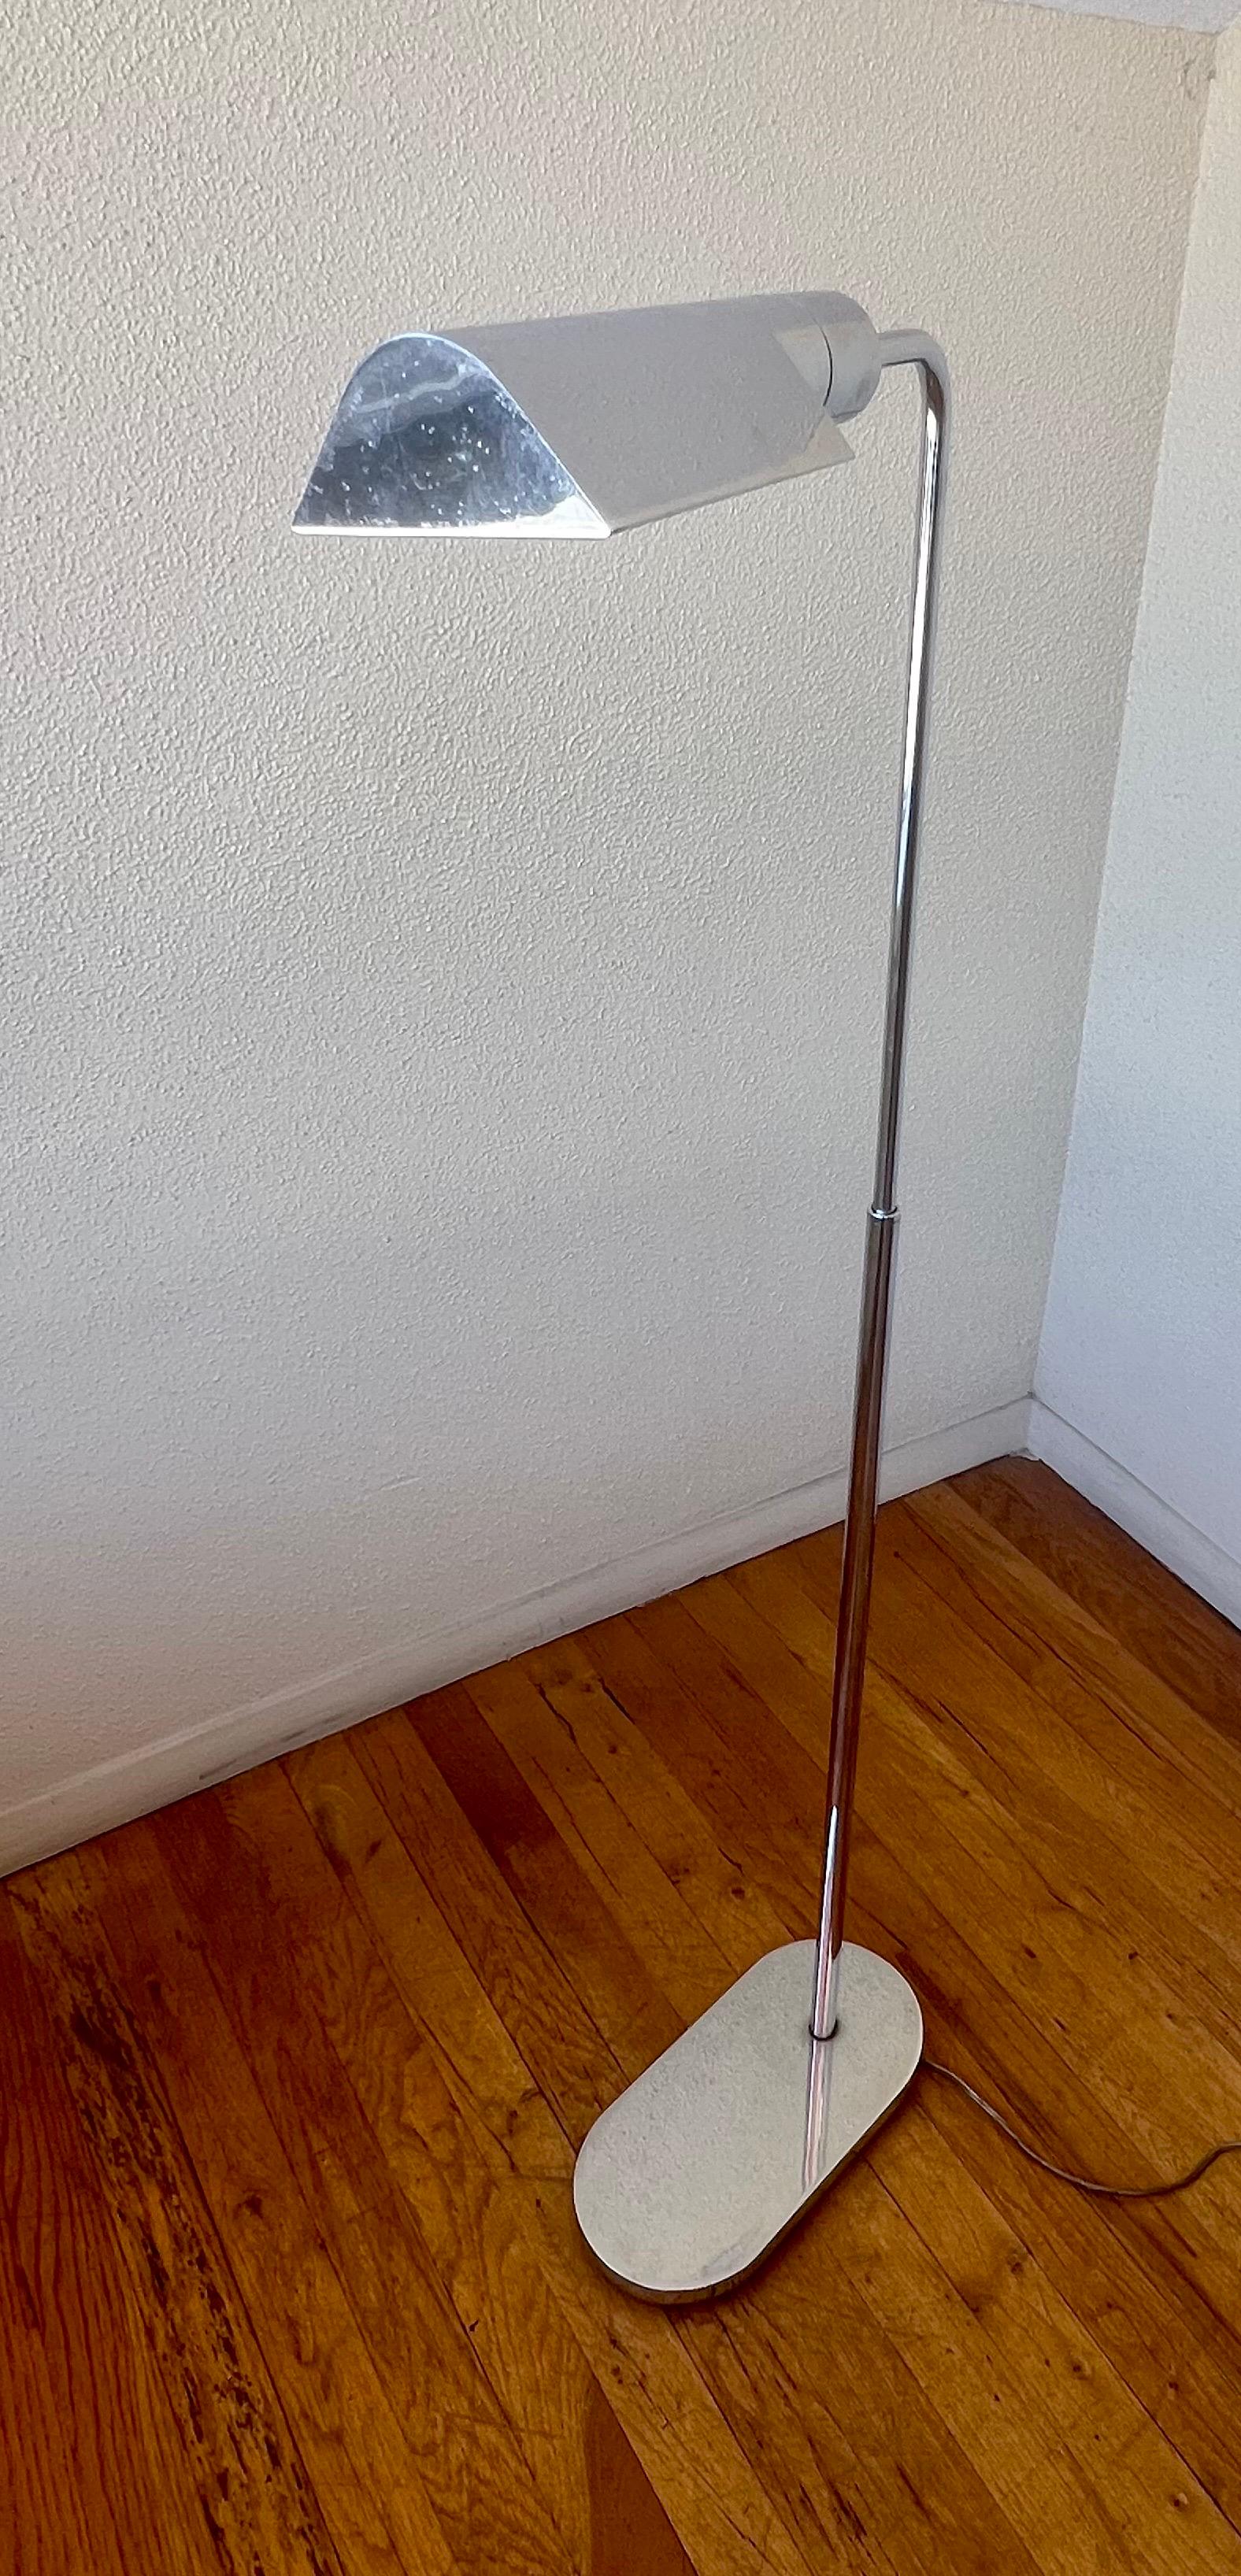 Multi-Directional Chrome Floor Lamp by Casella Lighting In Good Condition For Sale In San Diego, CA